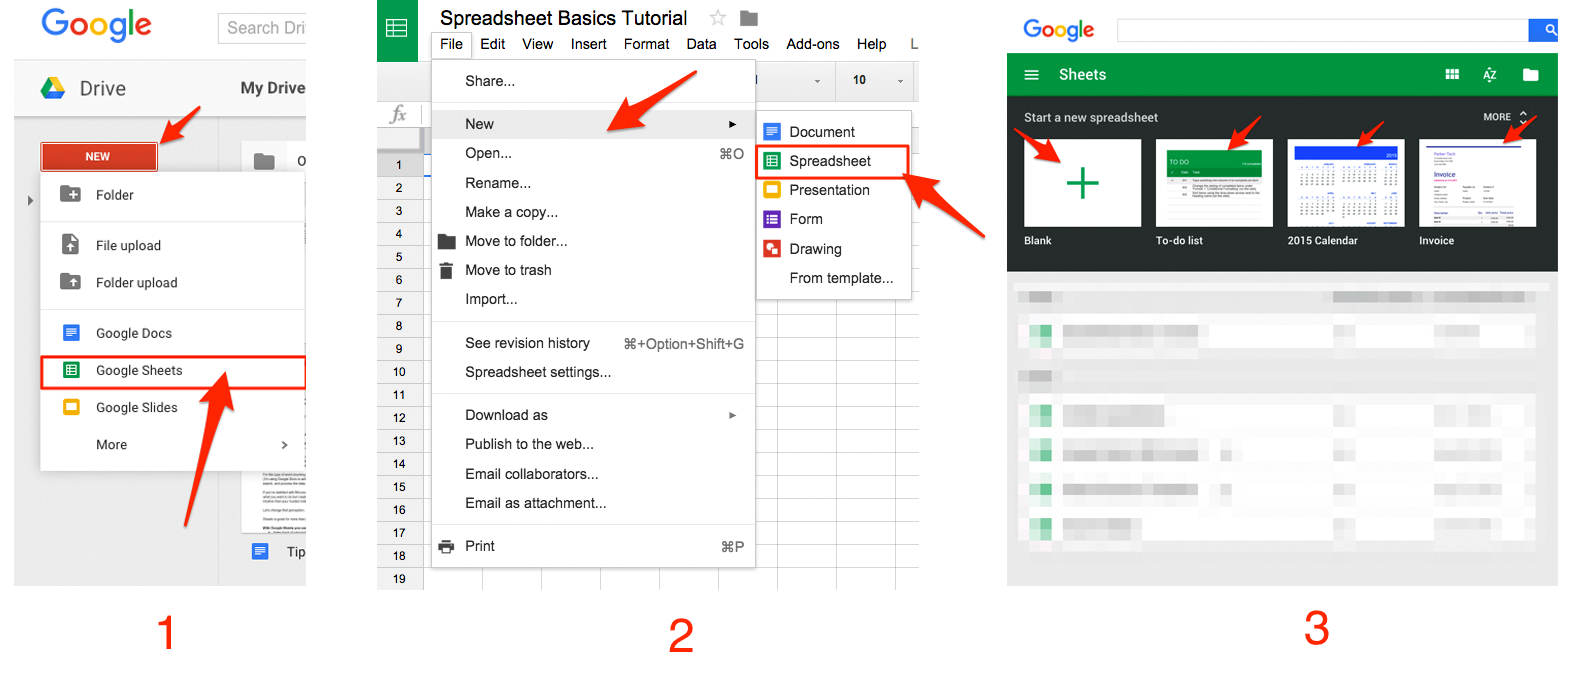 Learning How To Use Excel Spreadsheets With Google Sheets 101: The Beginner's Guide To Online Spreadsheets  The